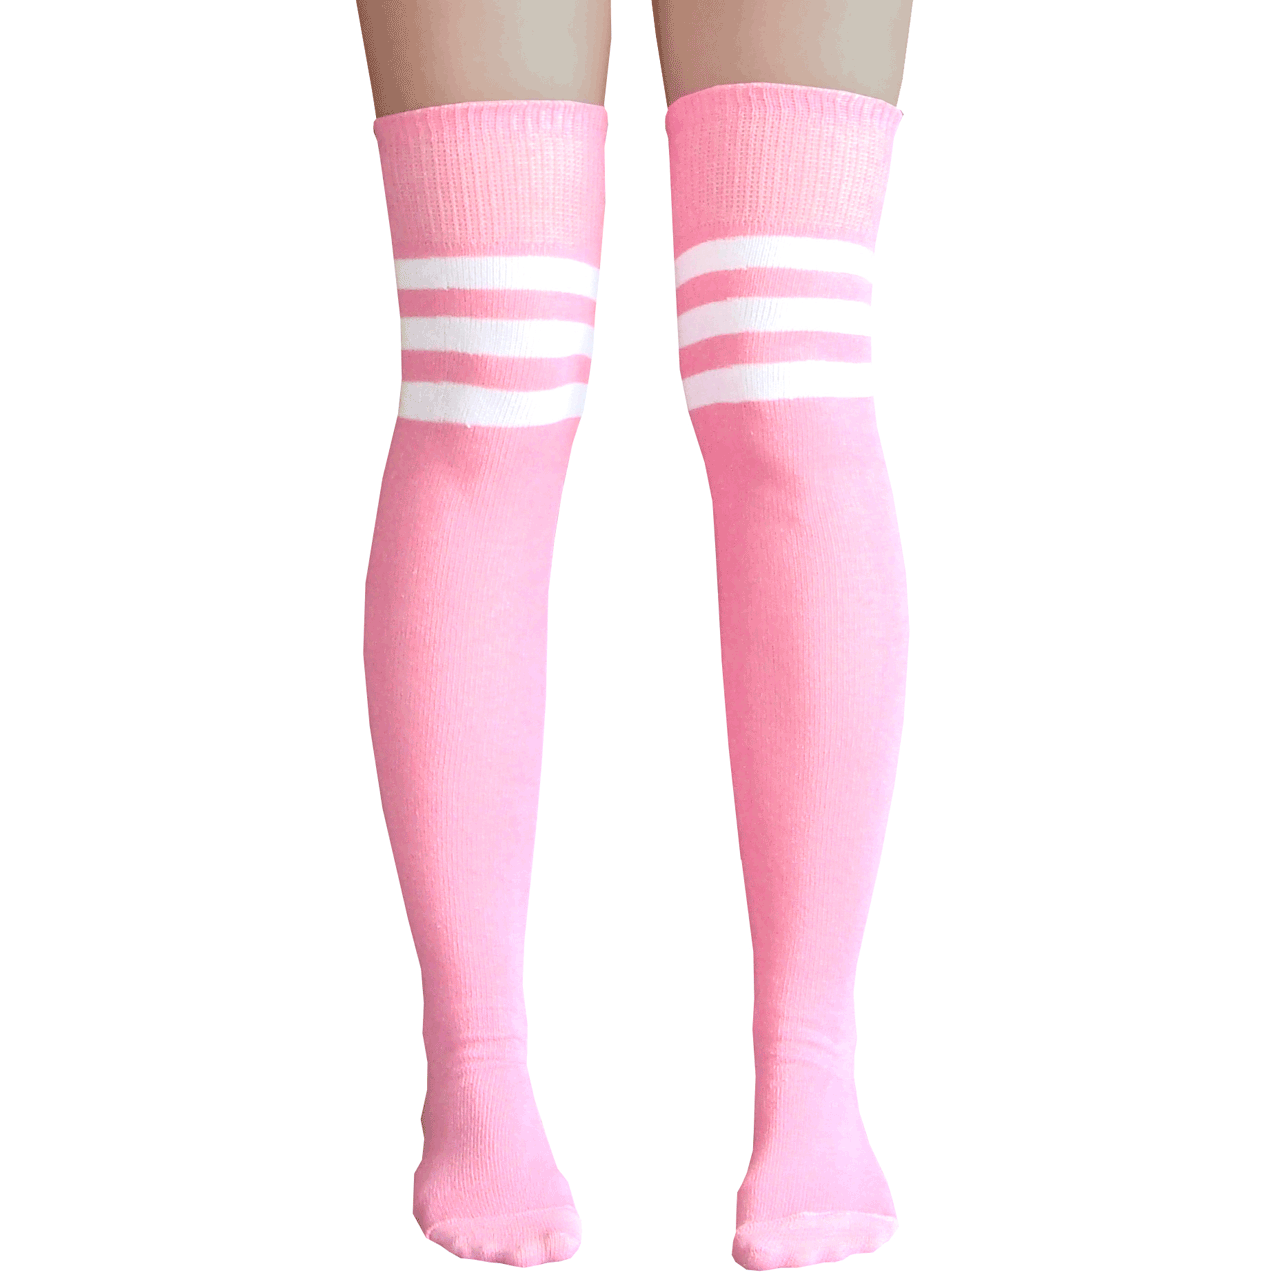 Chrissy's Socks Solid Baby Pink Thigh Highs